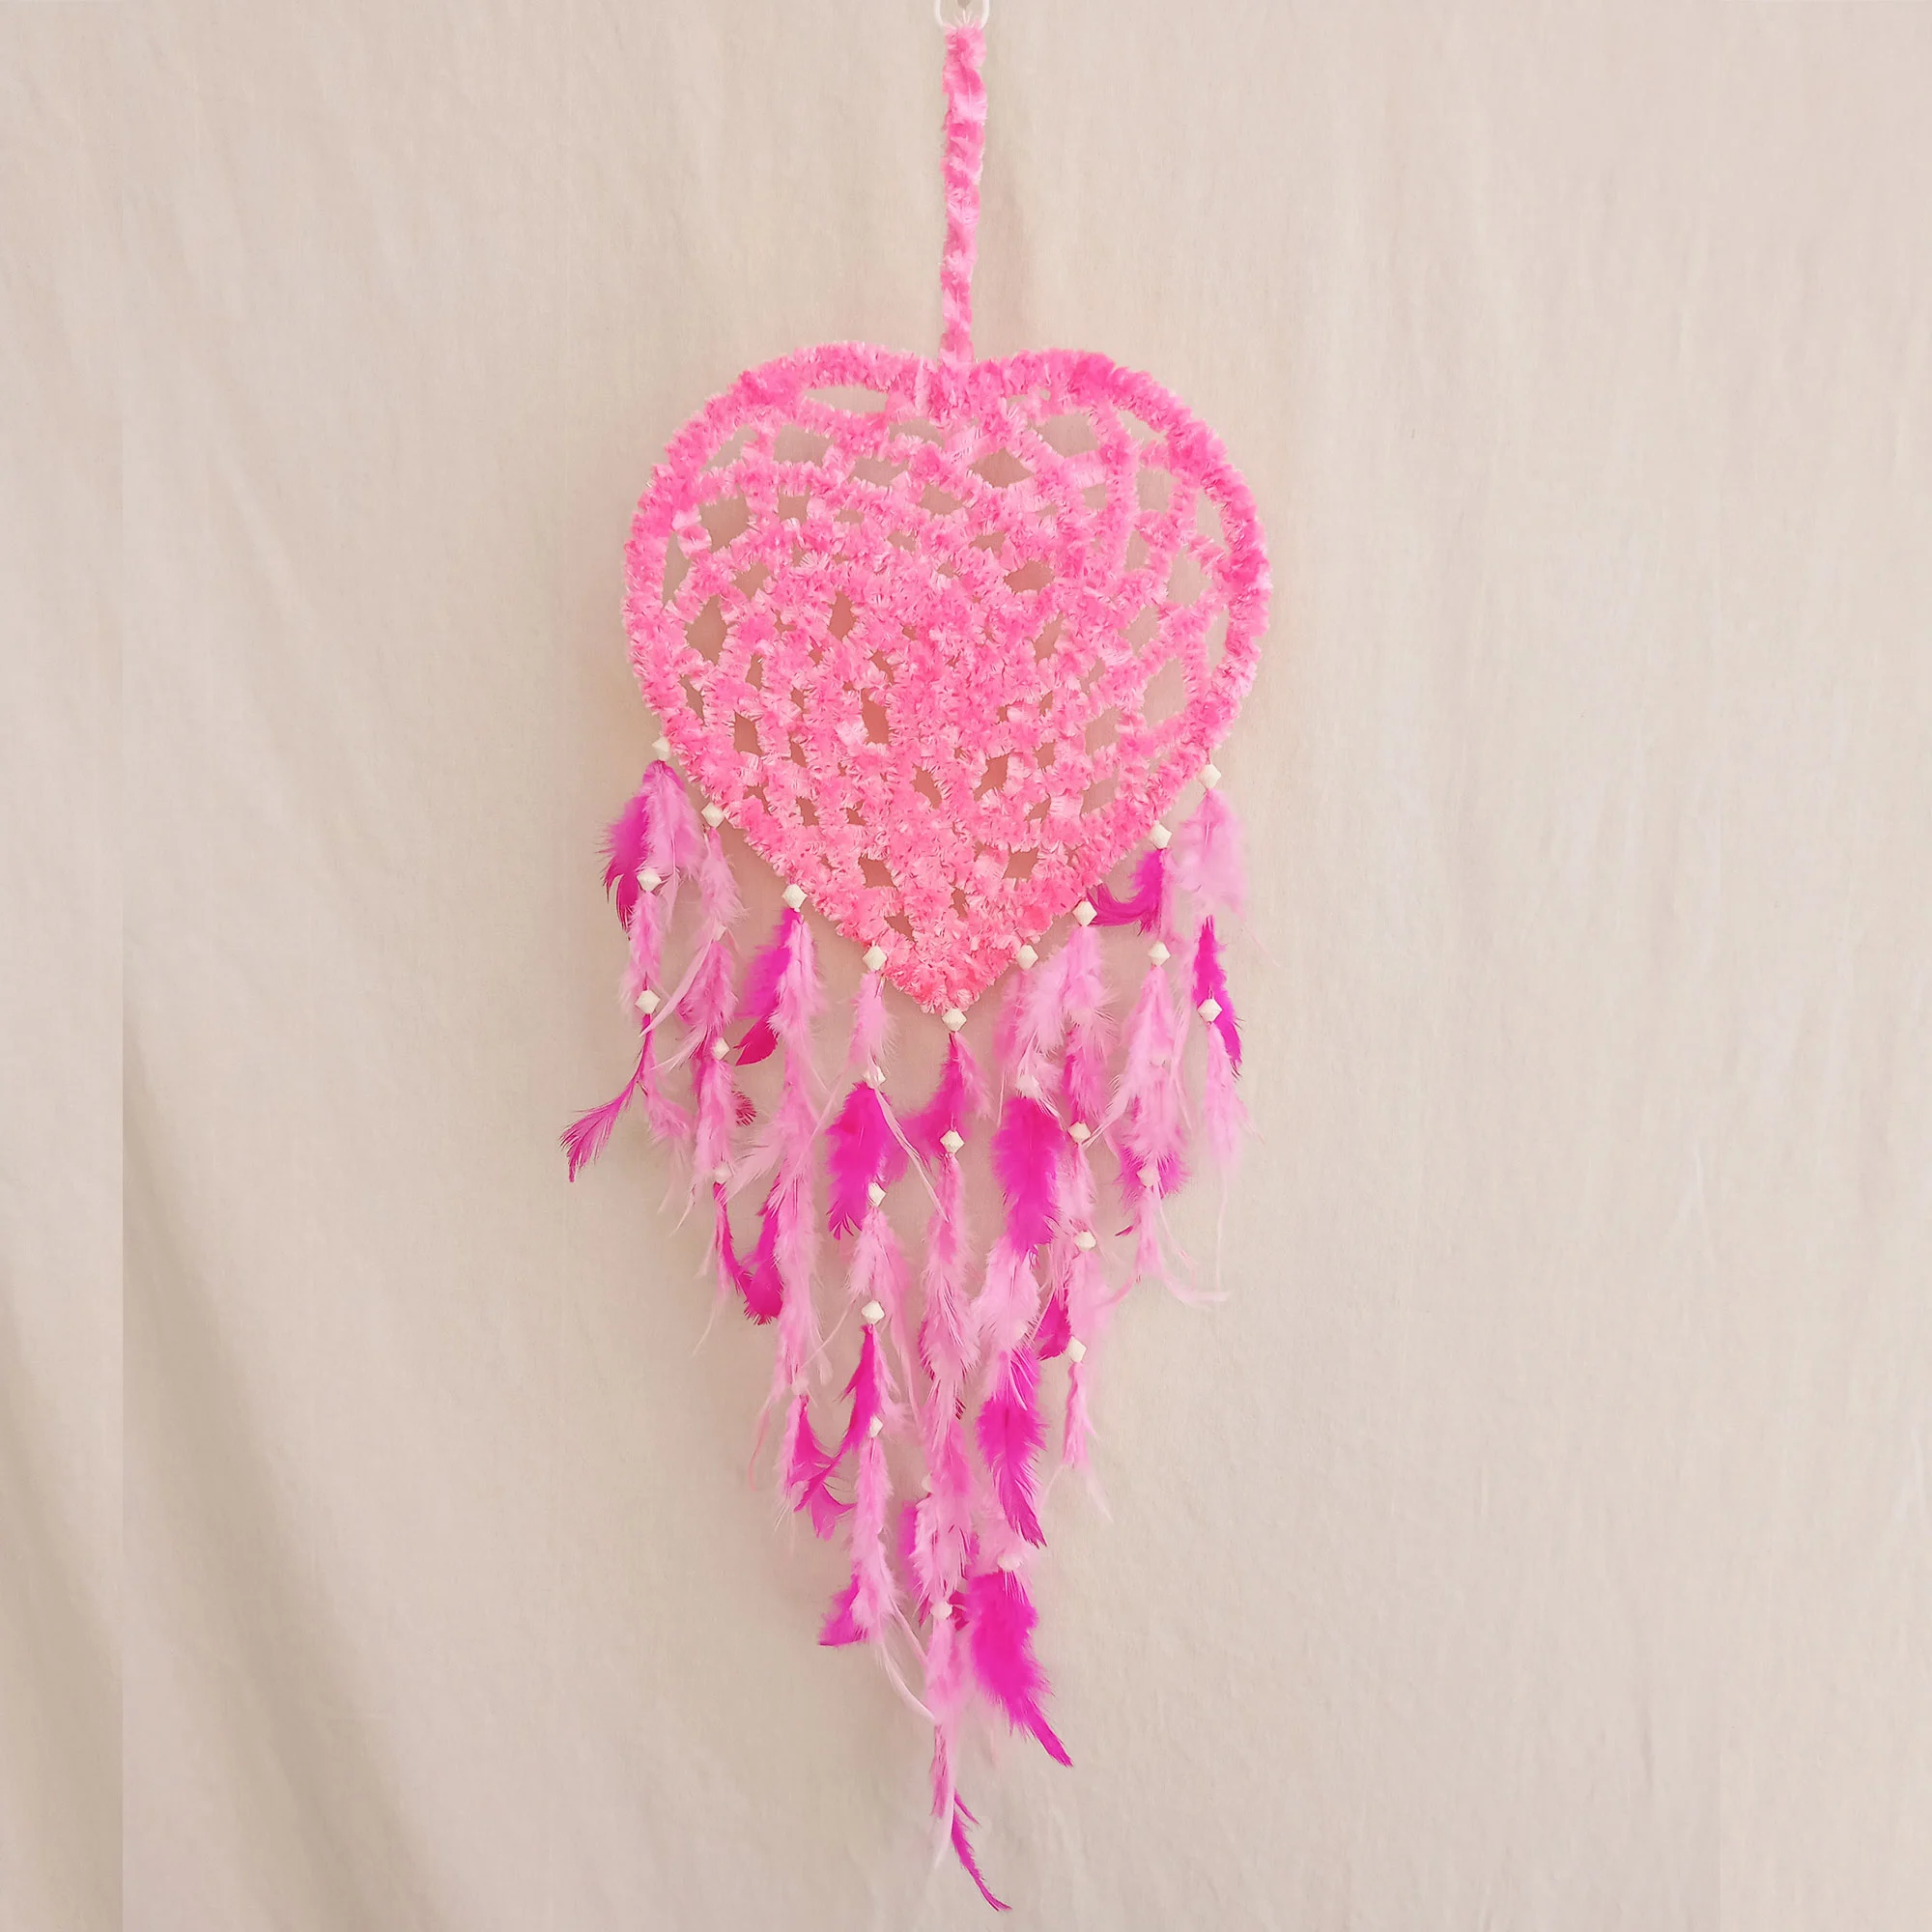 Pink Colour Dream Catcher For Wall Hangings, Home Décor, Handmade for Bedroom, Balcony Decorative with Feathers